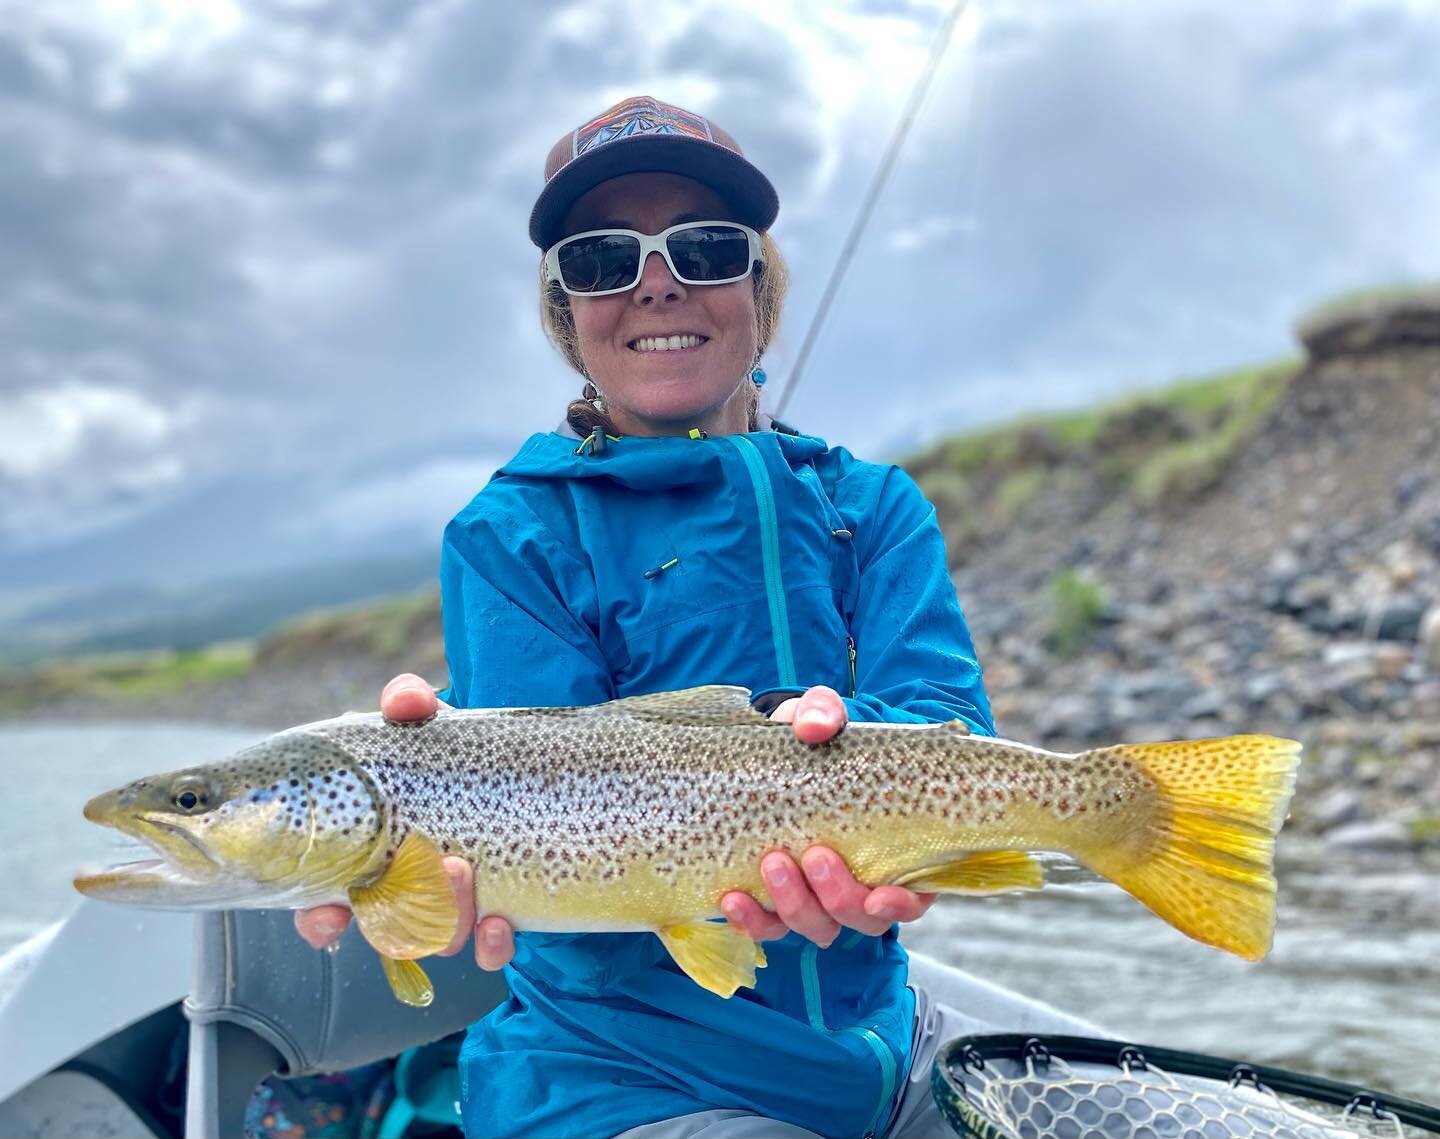 Happy Father&rsquo;s Day and first day of Summer from Fly Fish Montana. It&rsquo;s always a treat when I can spend the day with my two favorites😊. 
#happyfathersday #summersolstice #flyfishing #montana #rivers #happieness #yellowstoneriver #brownteo